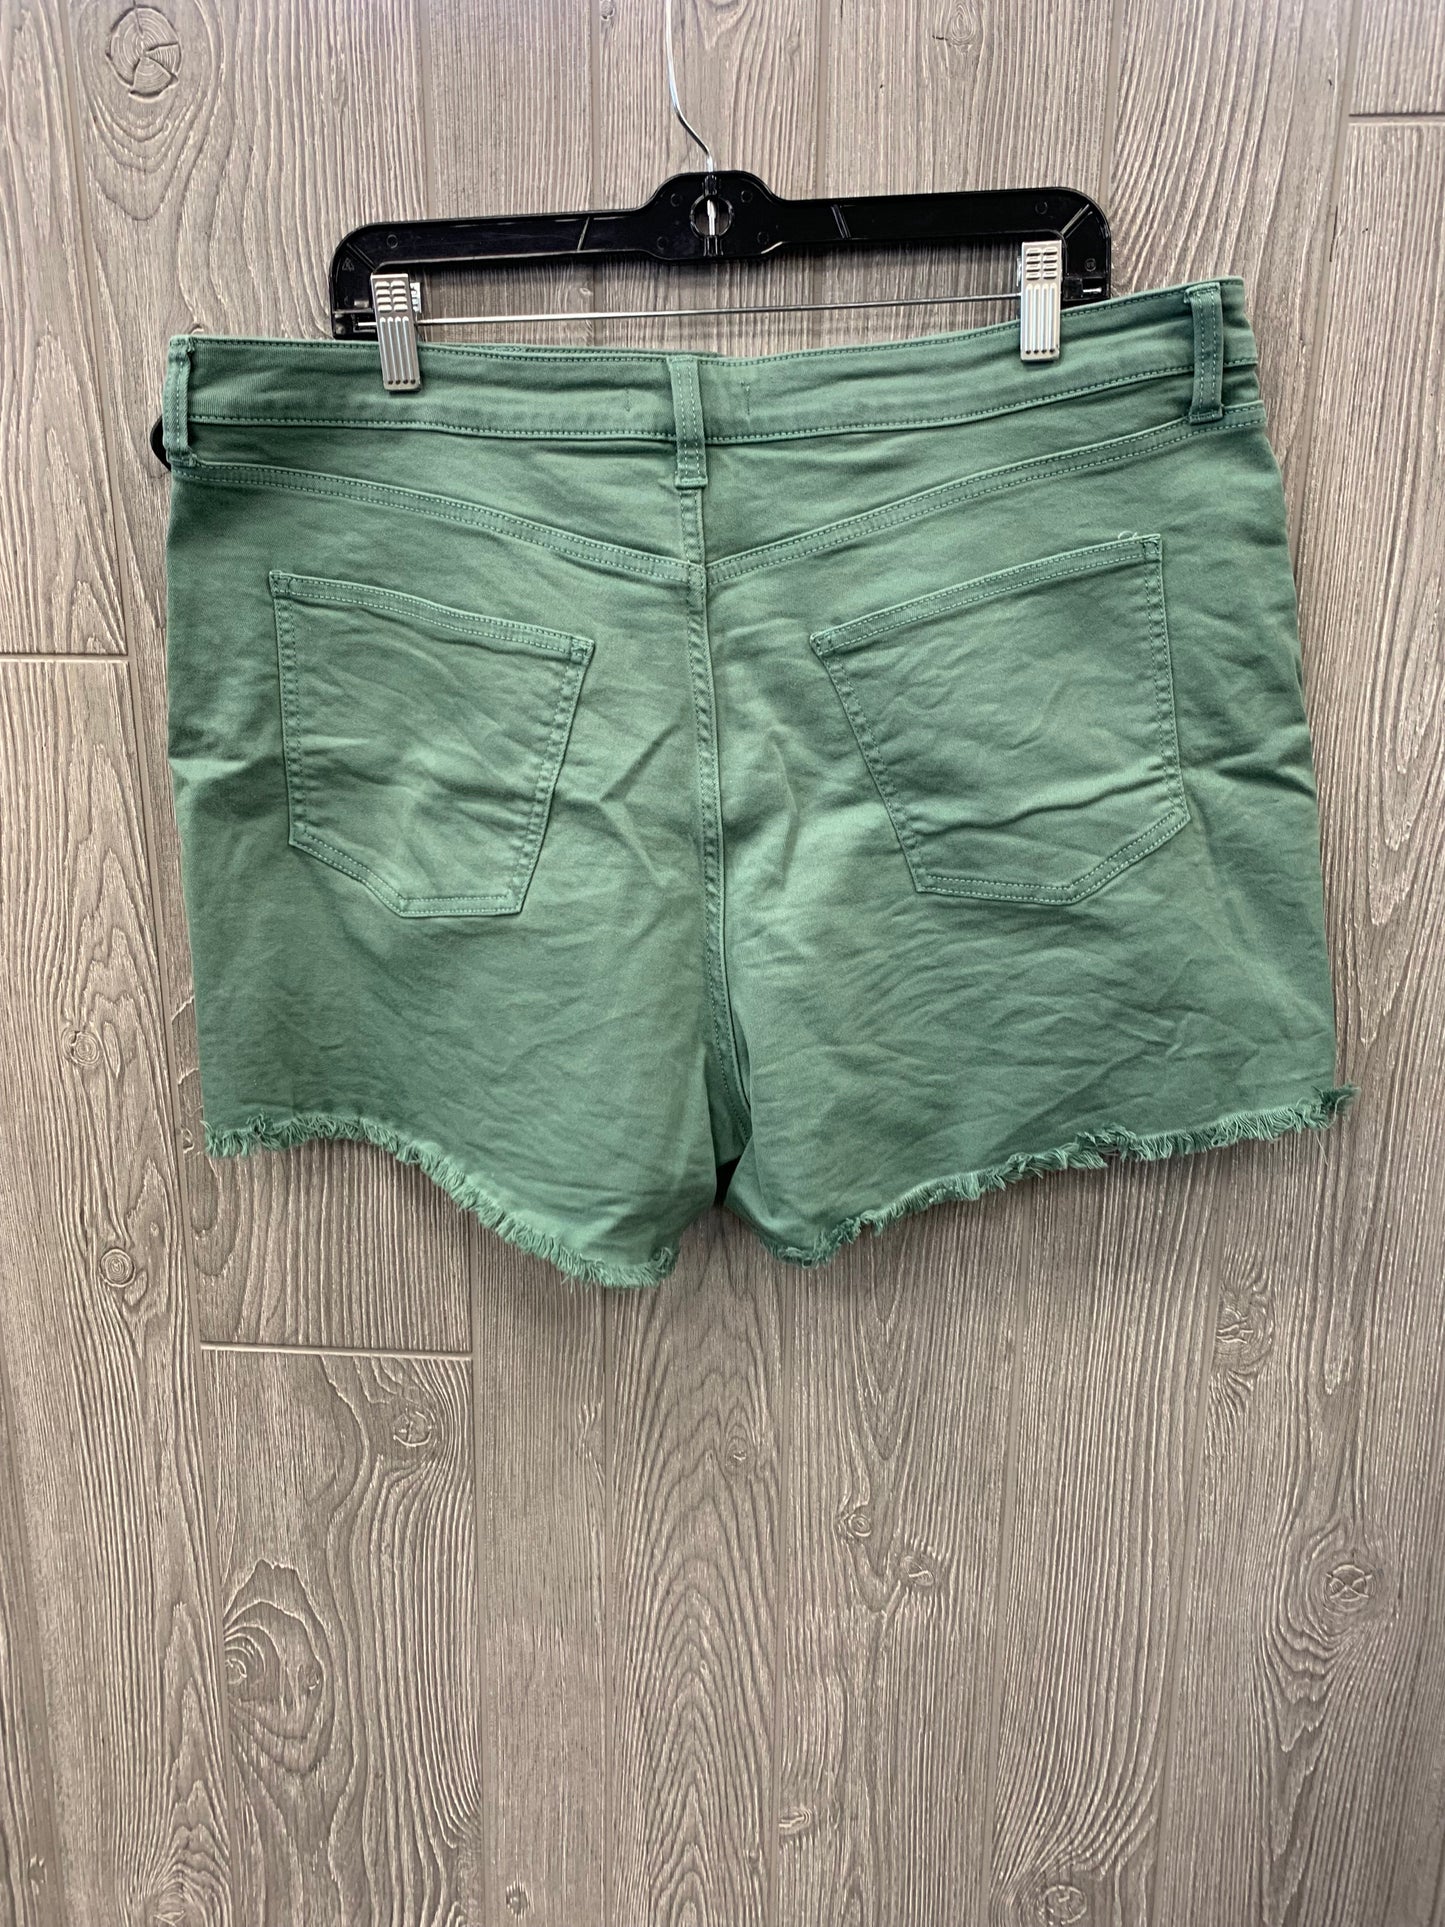 Shorts By Lc Lauren Conrad  Size: 18